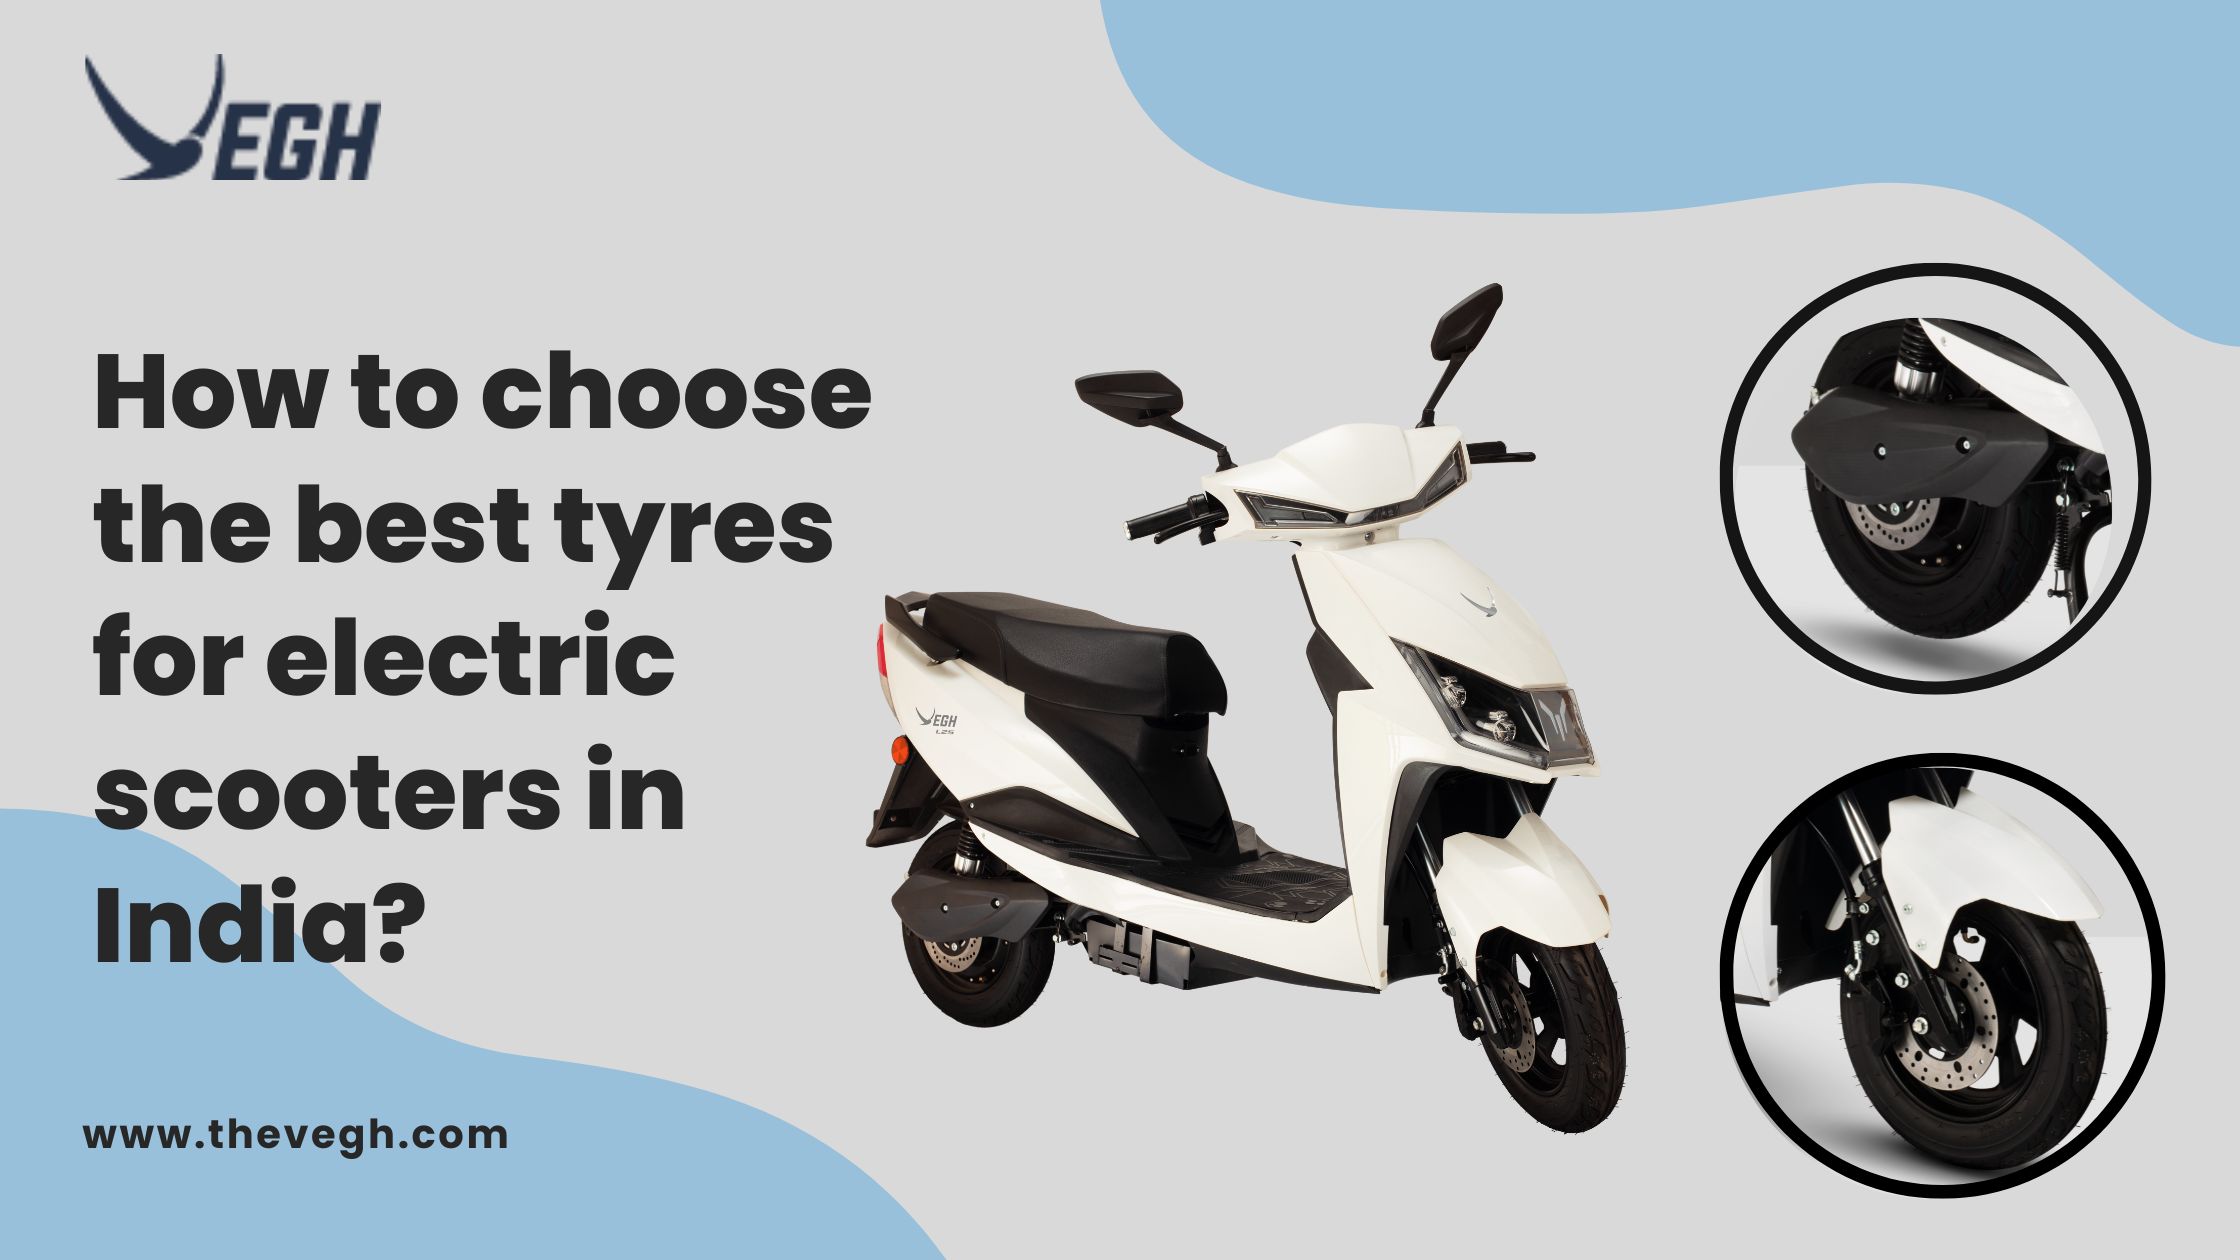 How to choose the best tyres for electric scooters in India?